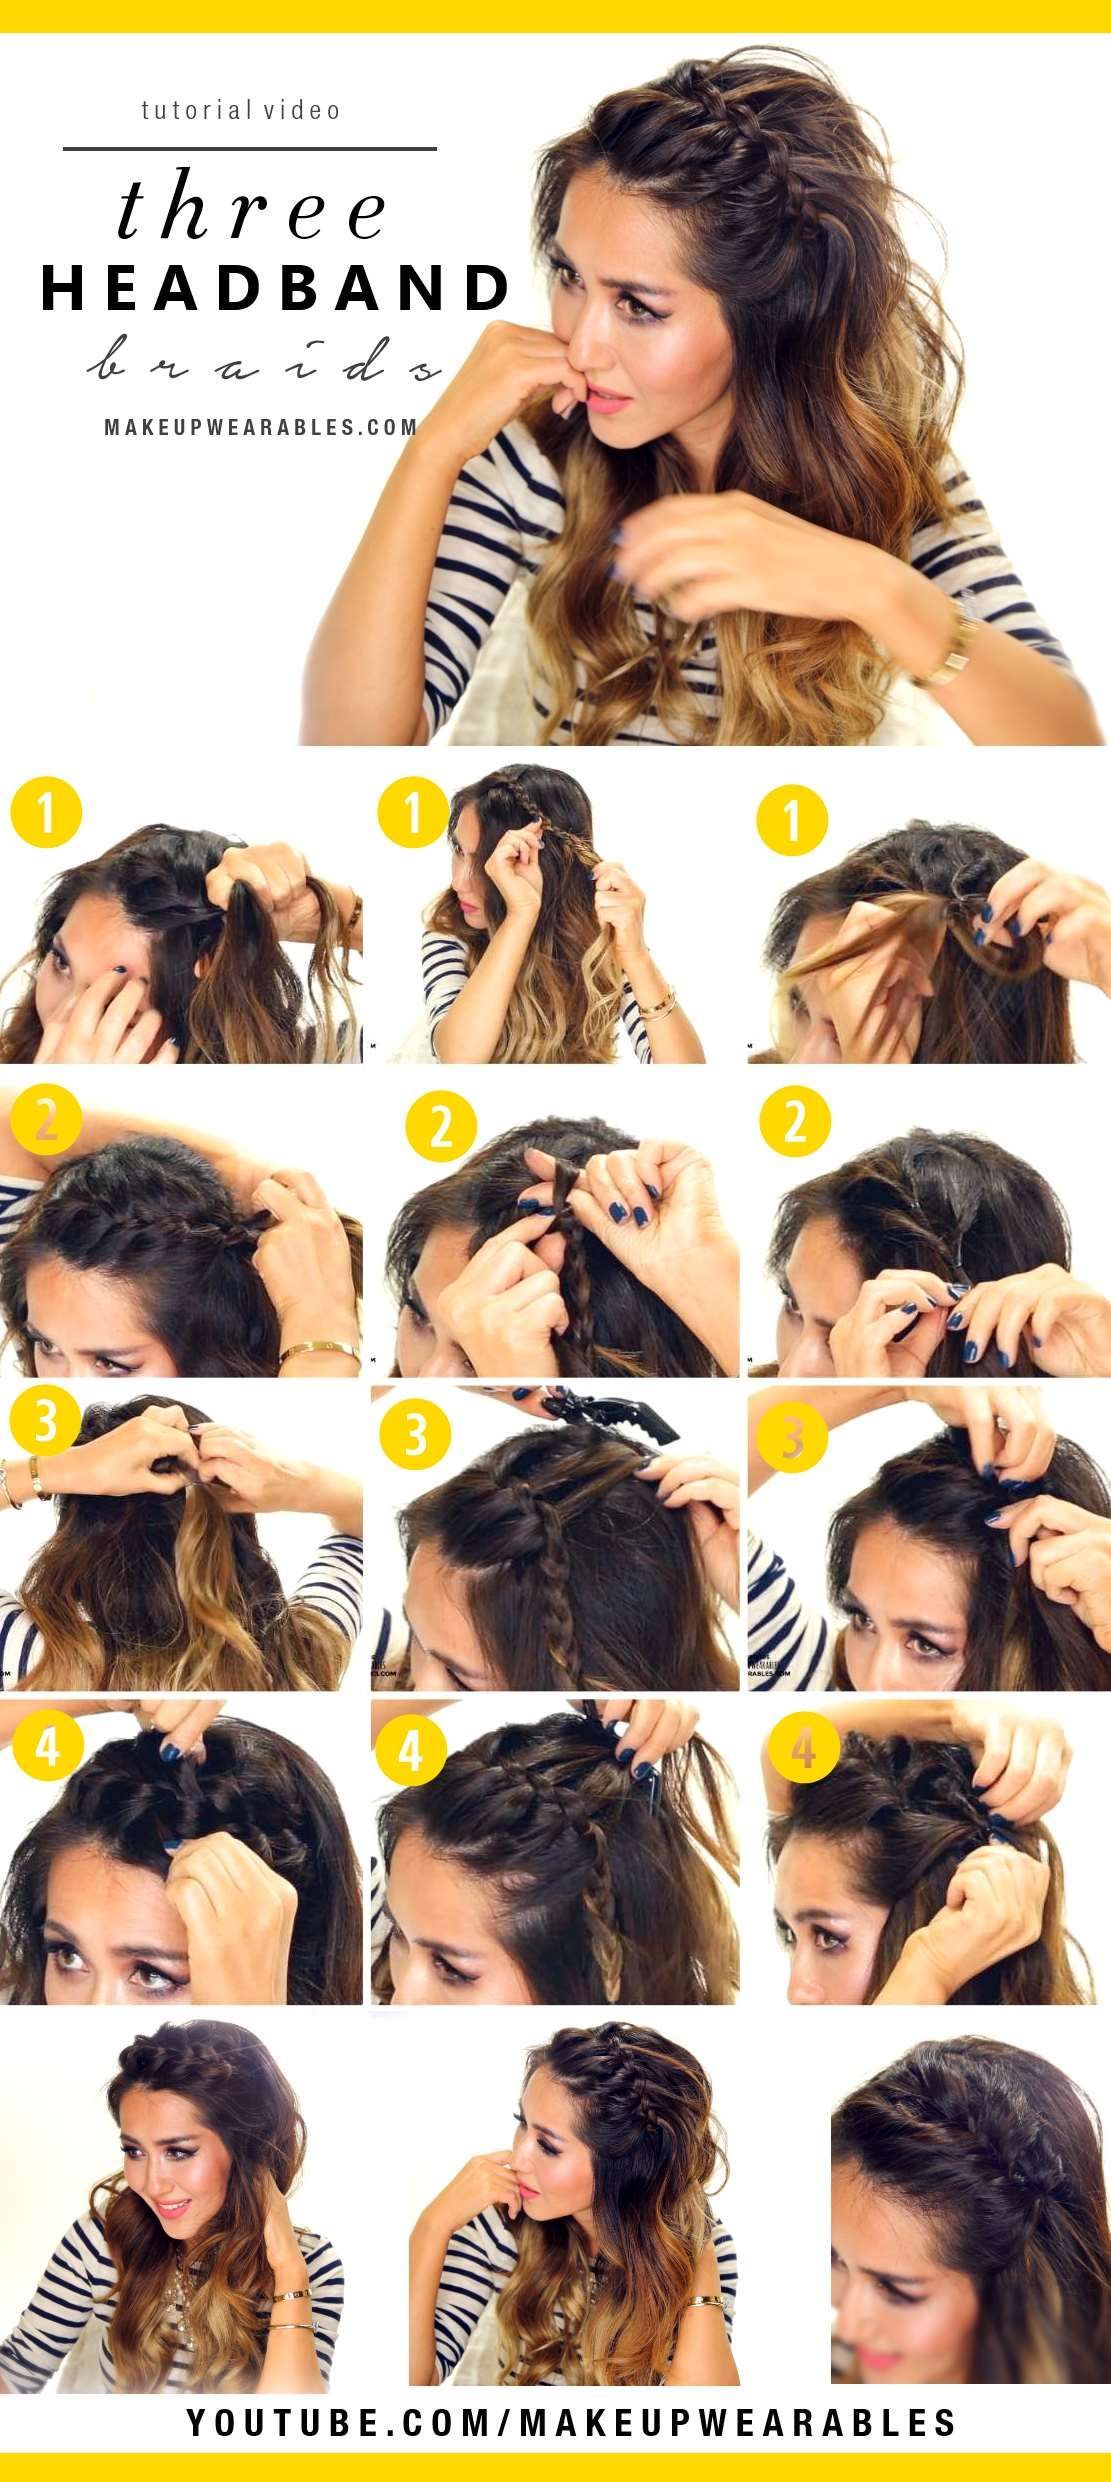 3 Easy Headband Braids – Cute half-up hairstyles for everyday!